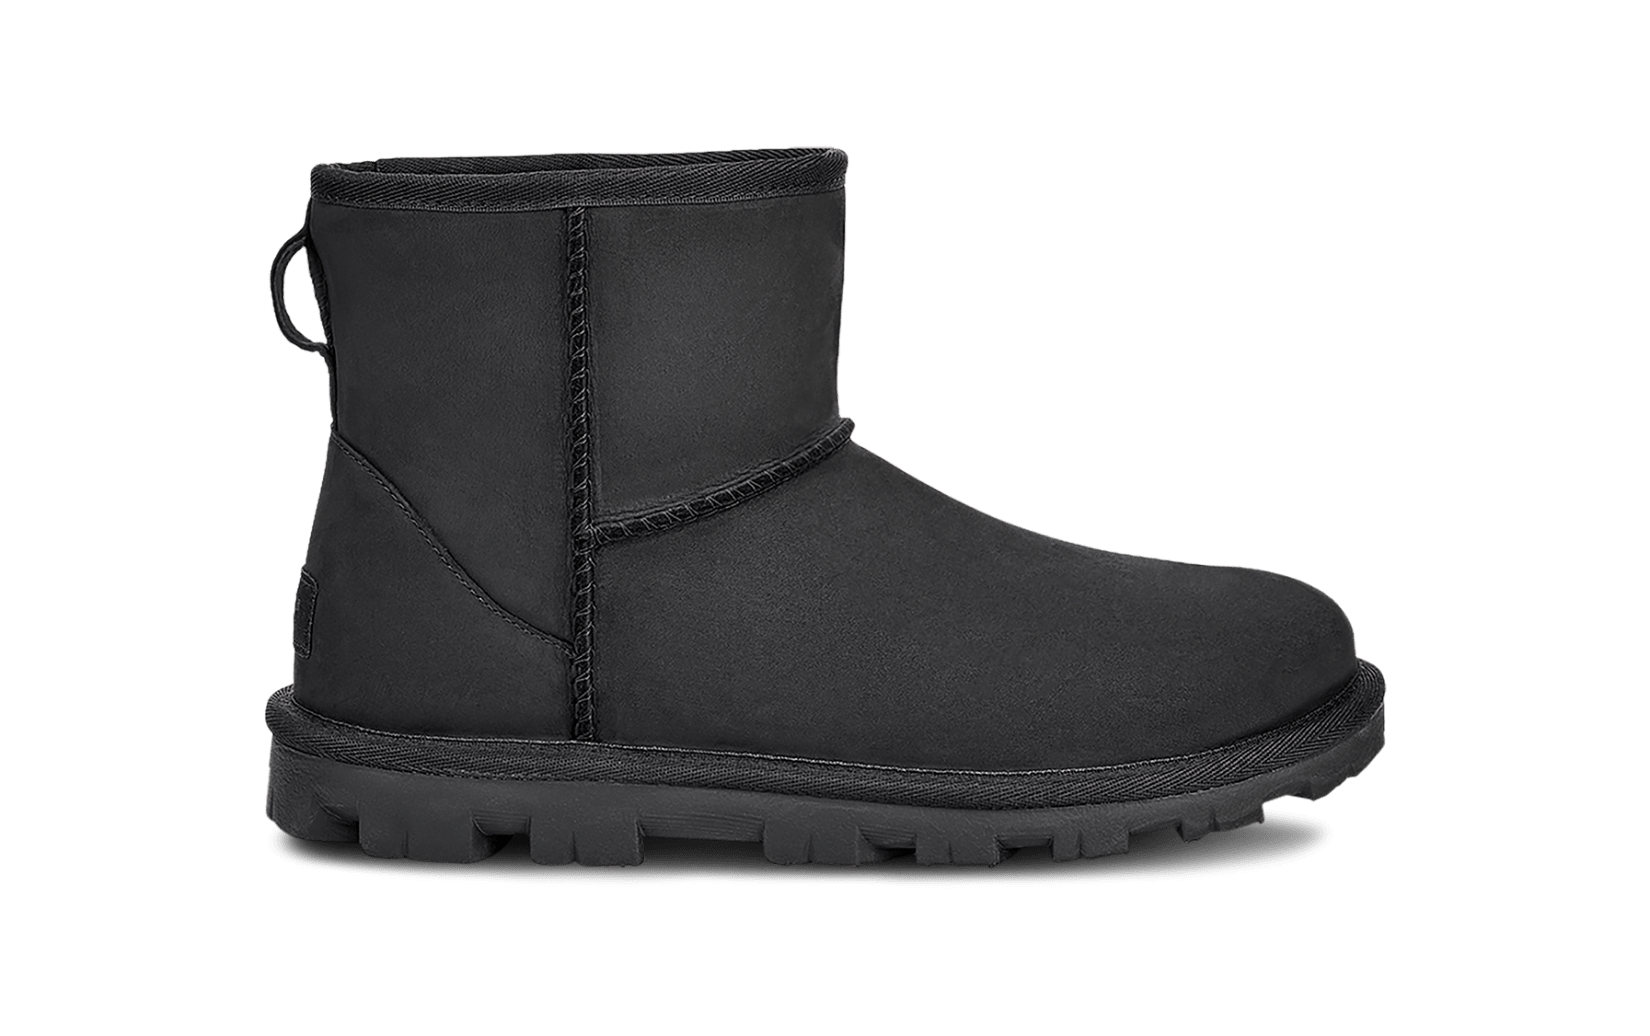 UGG leather boots